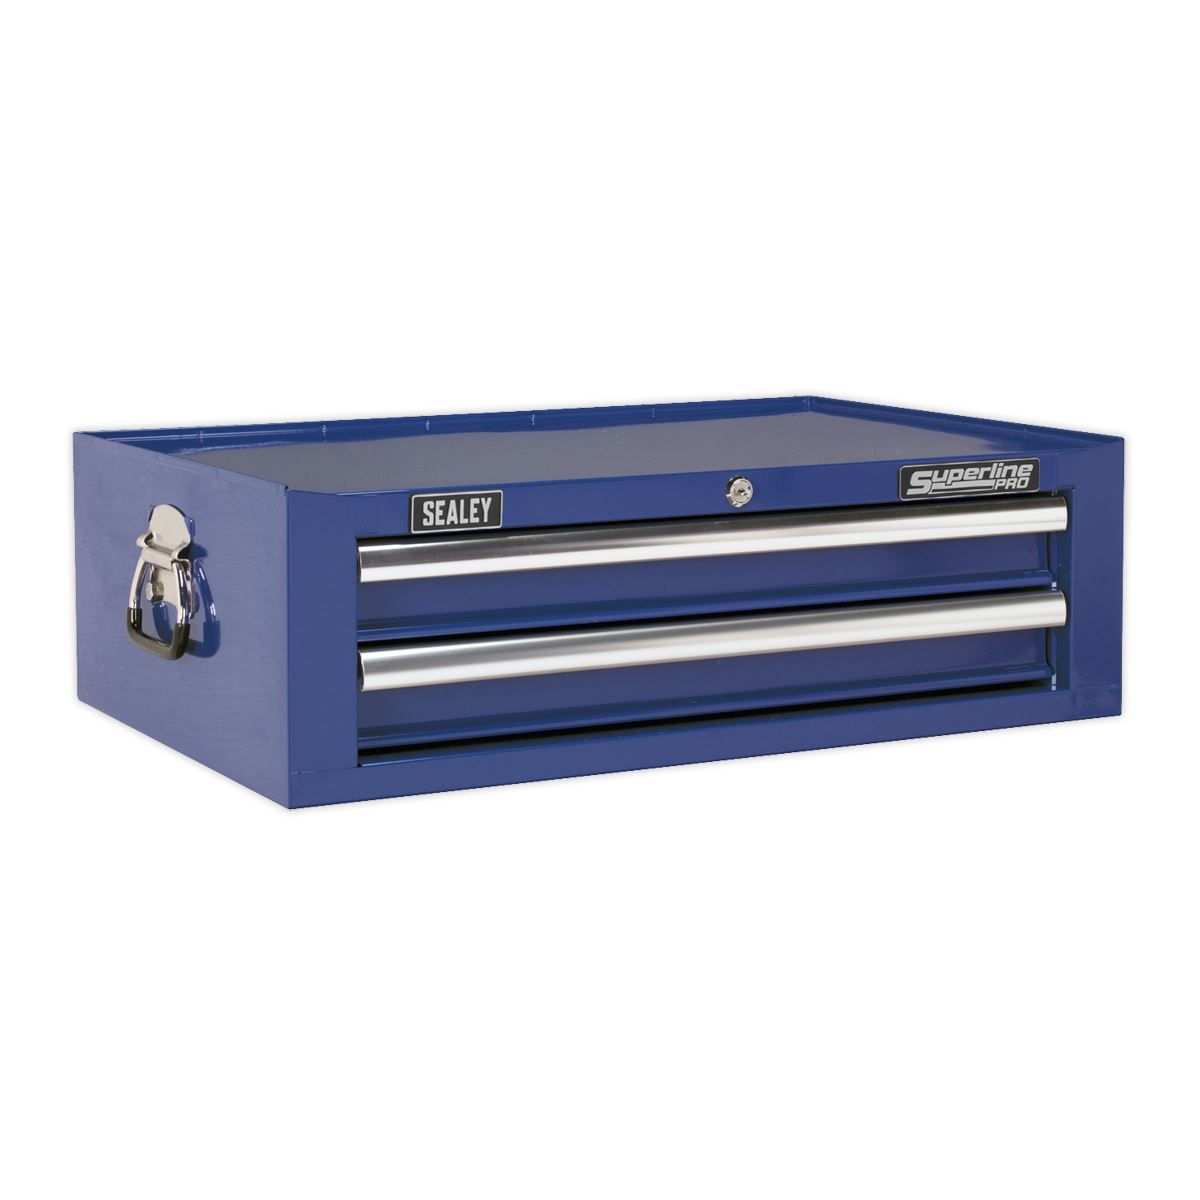 Sealey Superline Pro Mid-Box 2 Drawer with Ball-Bearing Slides - Blue